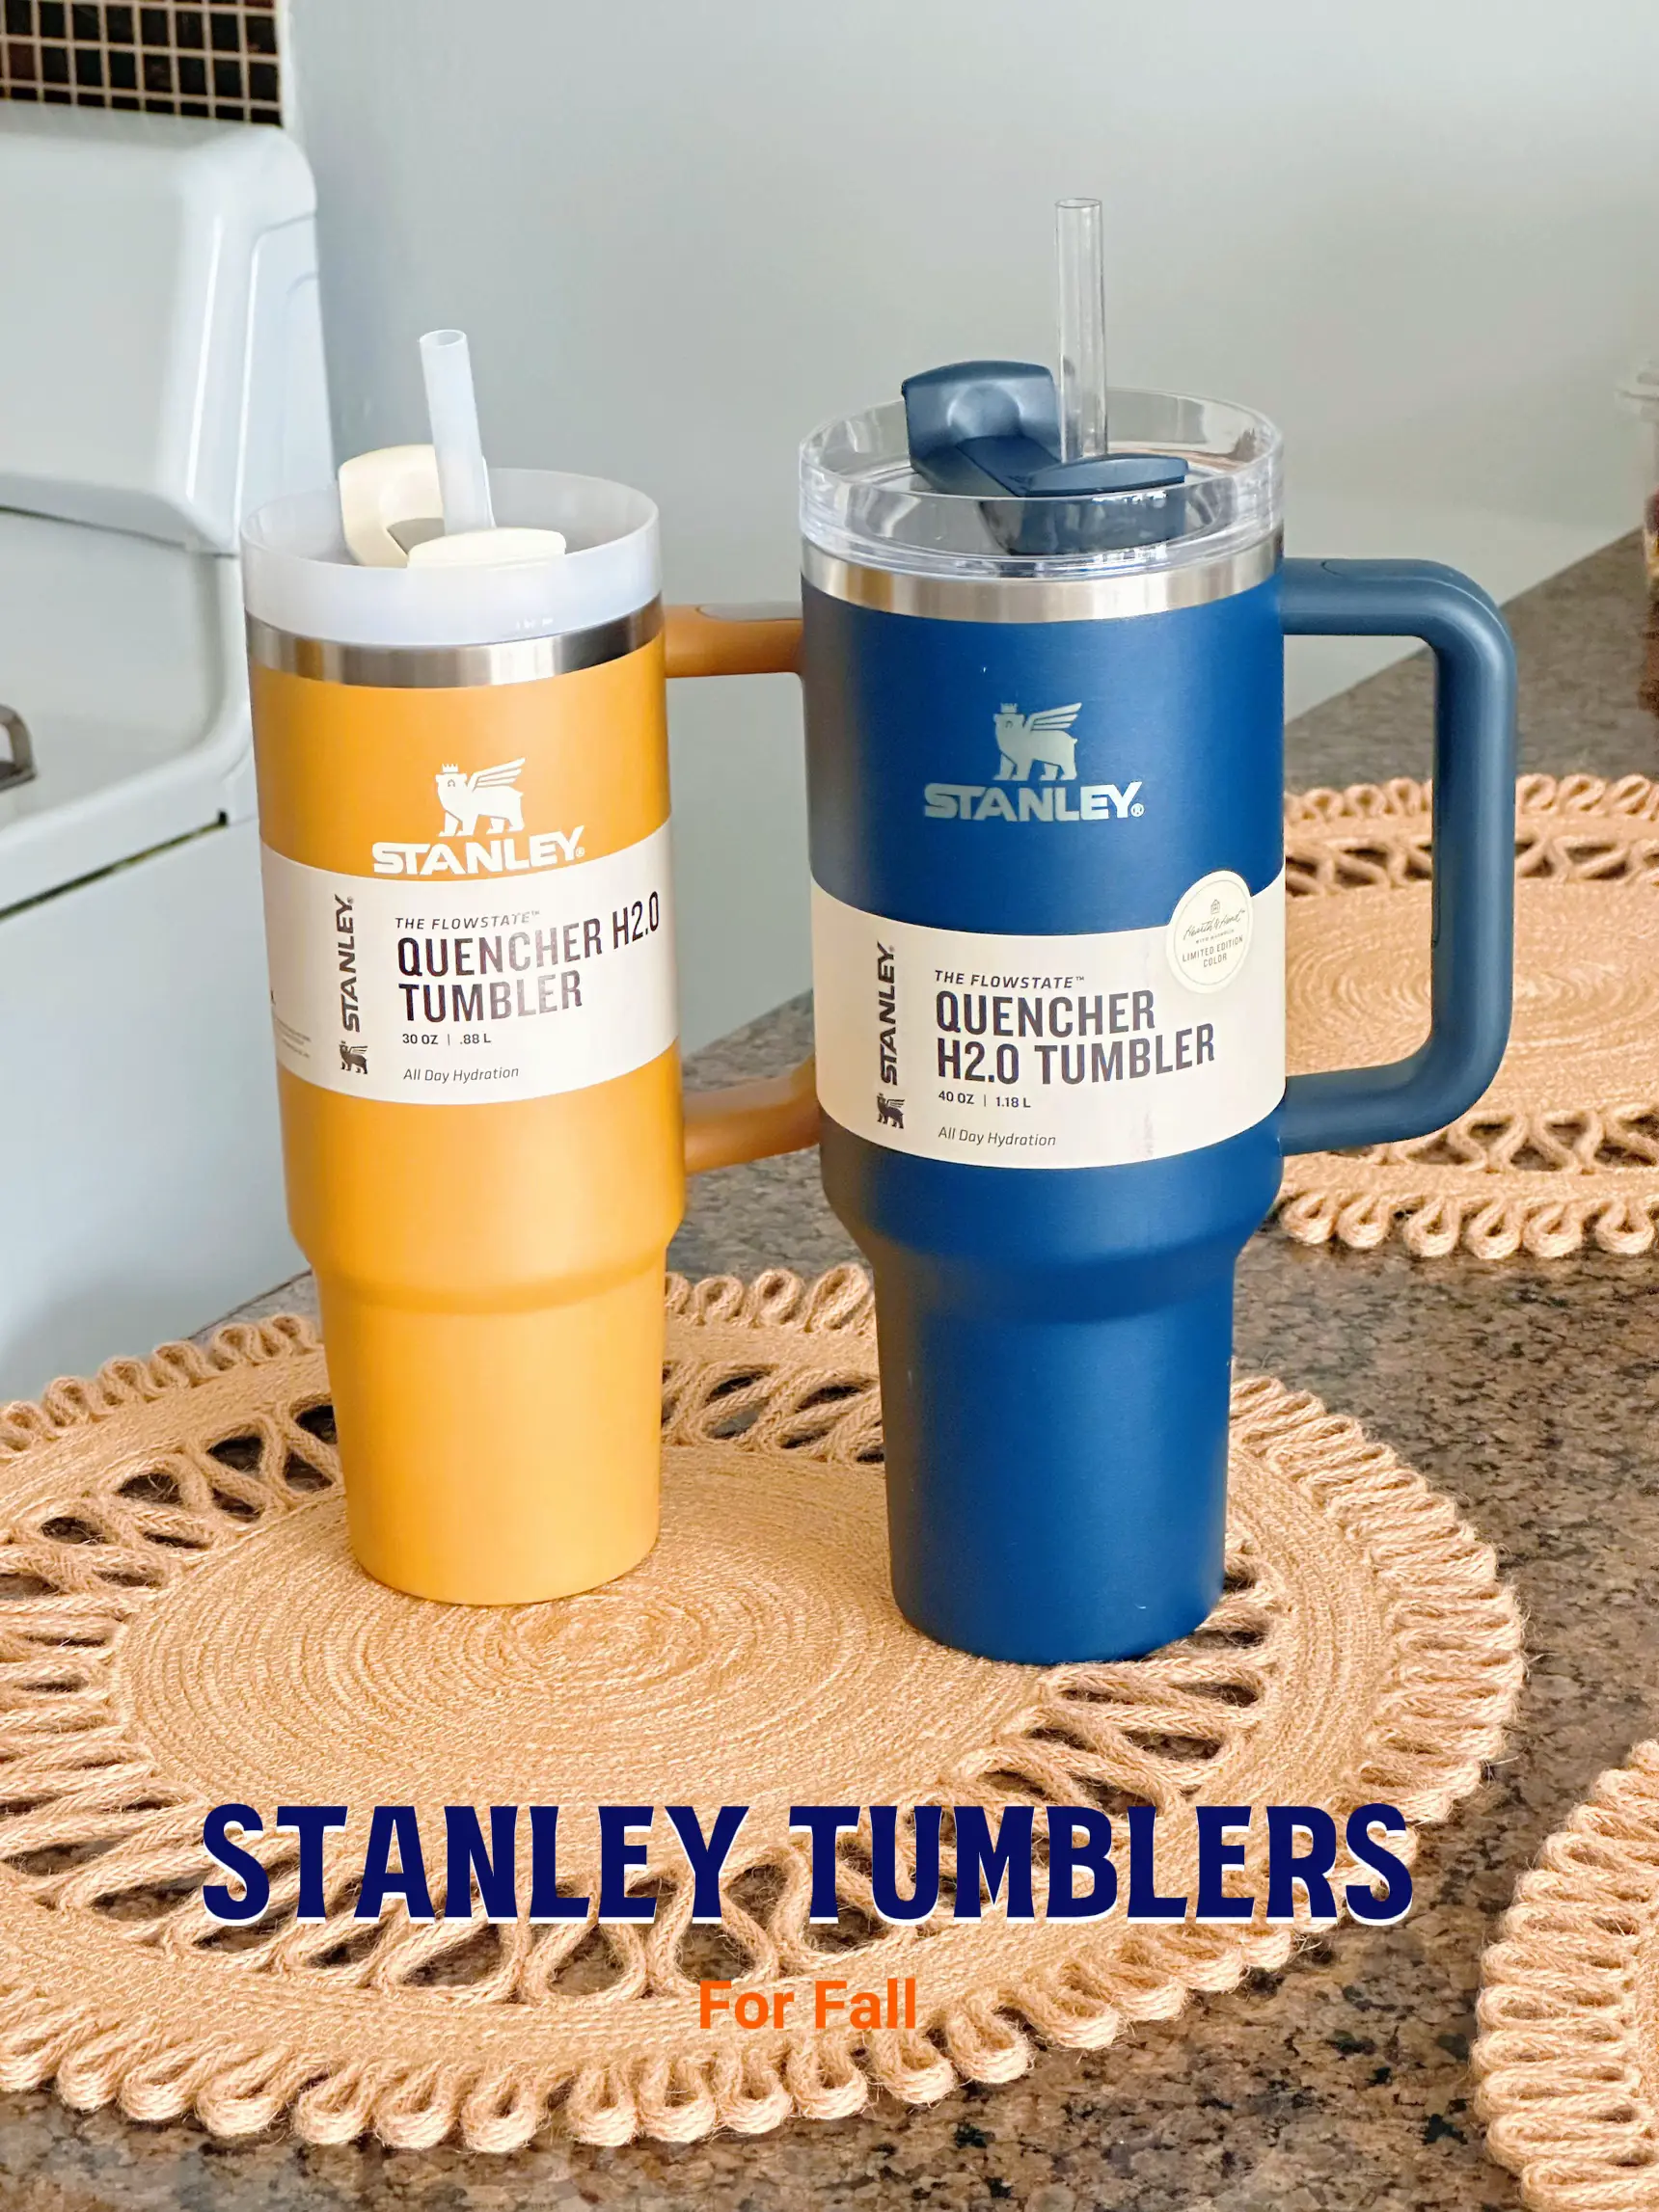 Finally got the Stanley 40 oz. Tumbler in the color cream! #stanley #s